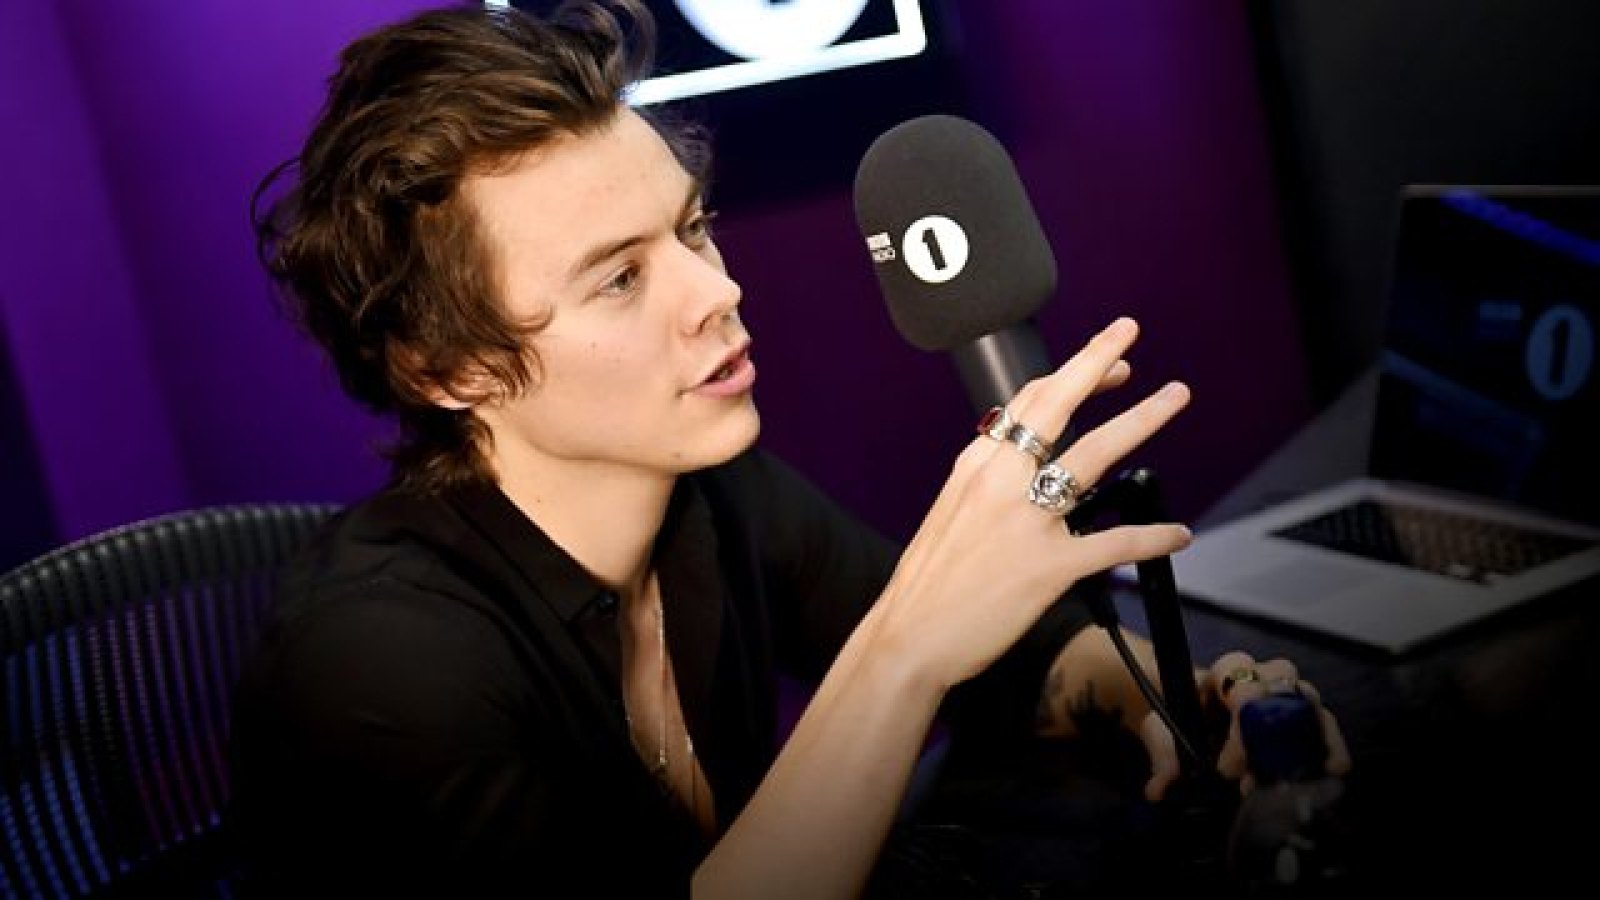 Harry Styles Releases First Solo Single 'Sign of the Times'